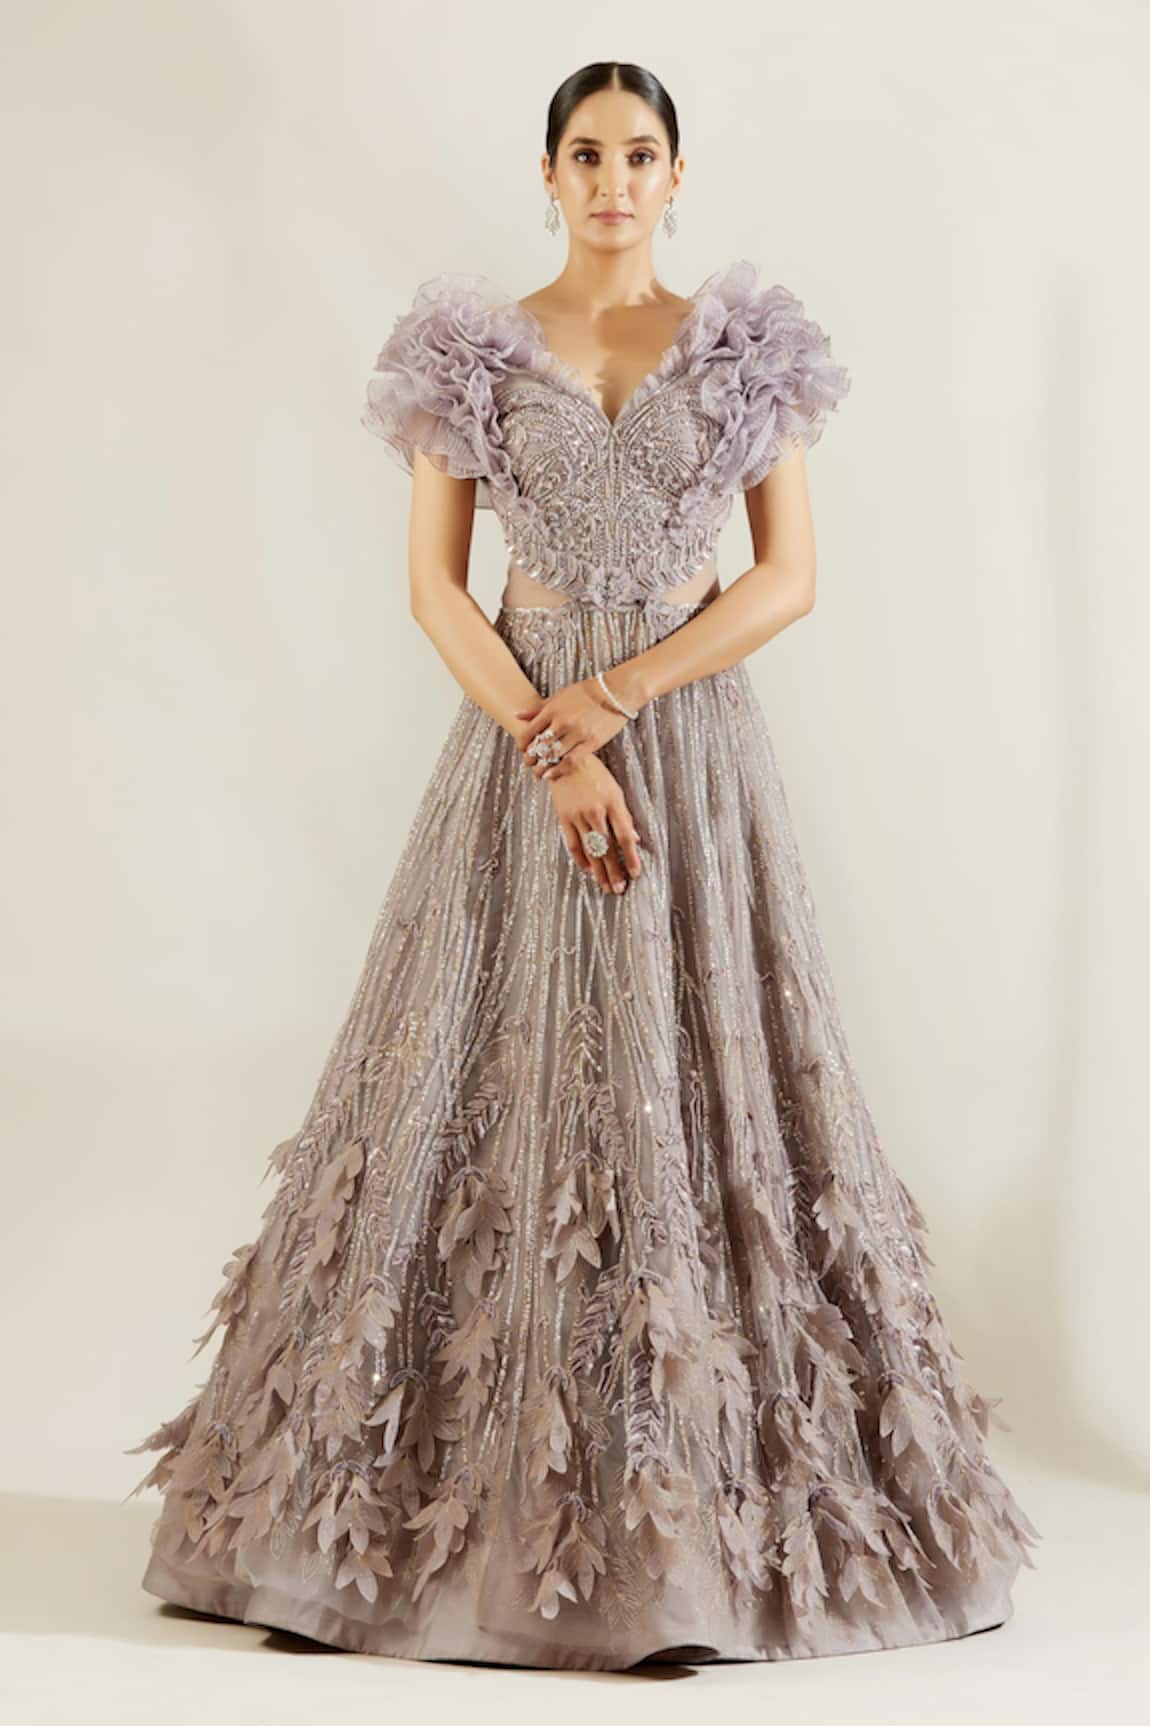 Adaara Couture Organza Embellished Gown